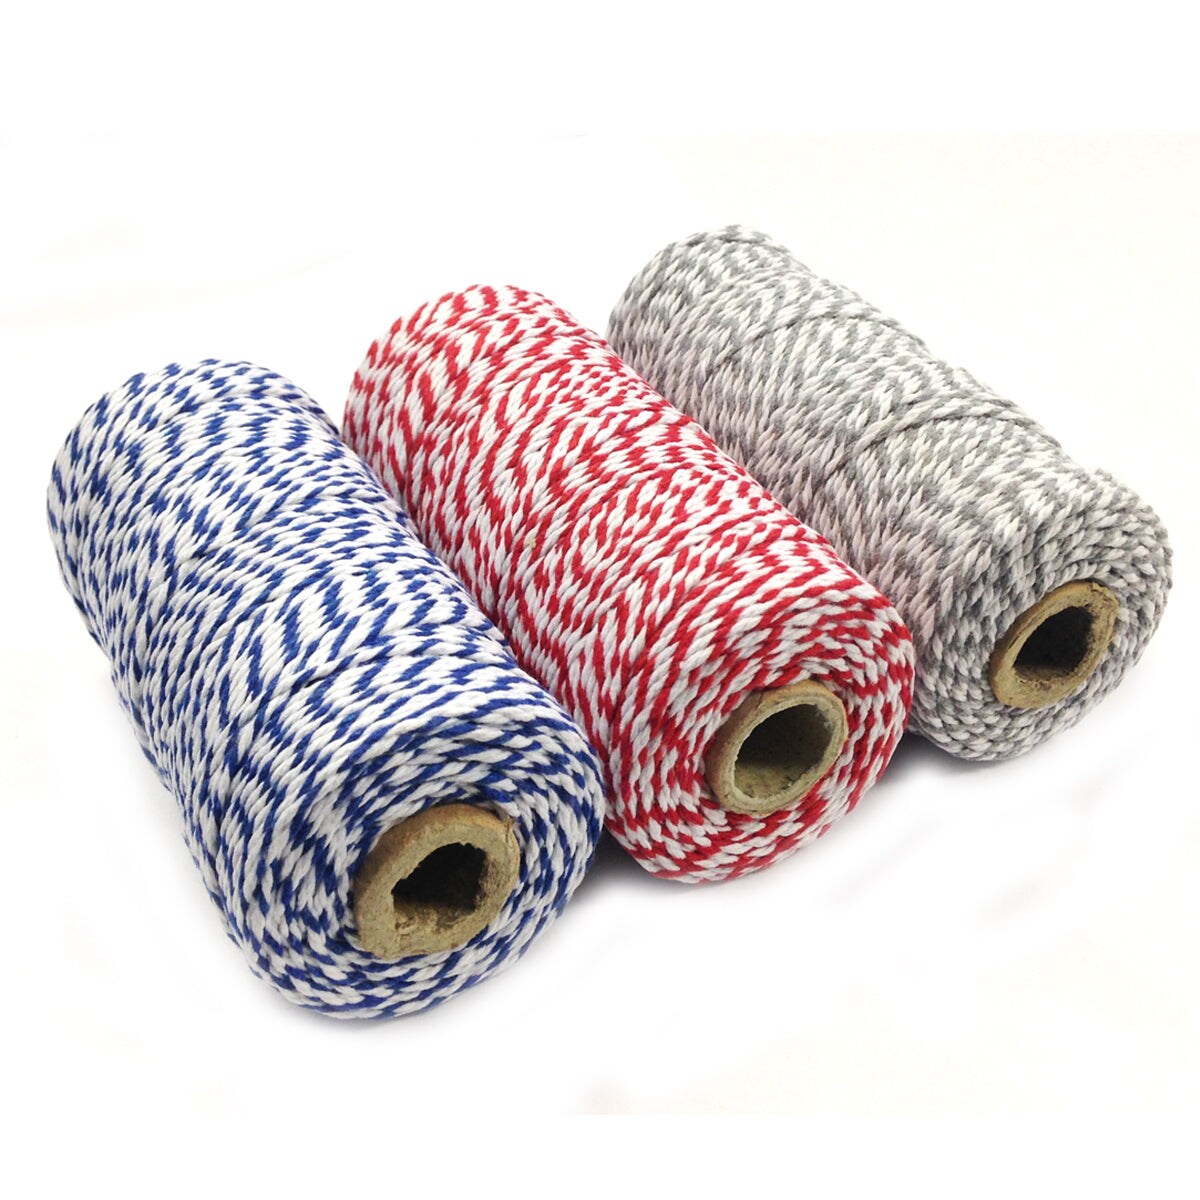 Wrapables Cotton Baker&#x27;s Twine 12ply 330 Yards (Set of 3 Spools x 110 Yards) for Gift Wrapping, Party Decor, and Arts and Crafts (Grey, Red, Navy)